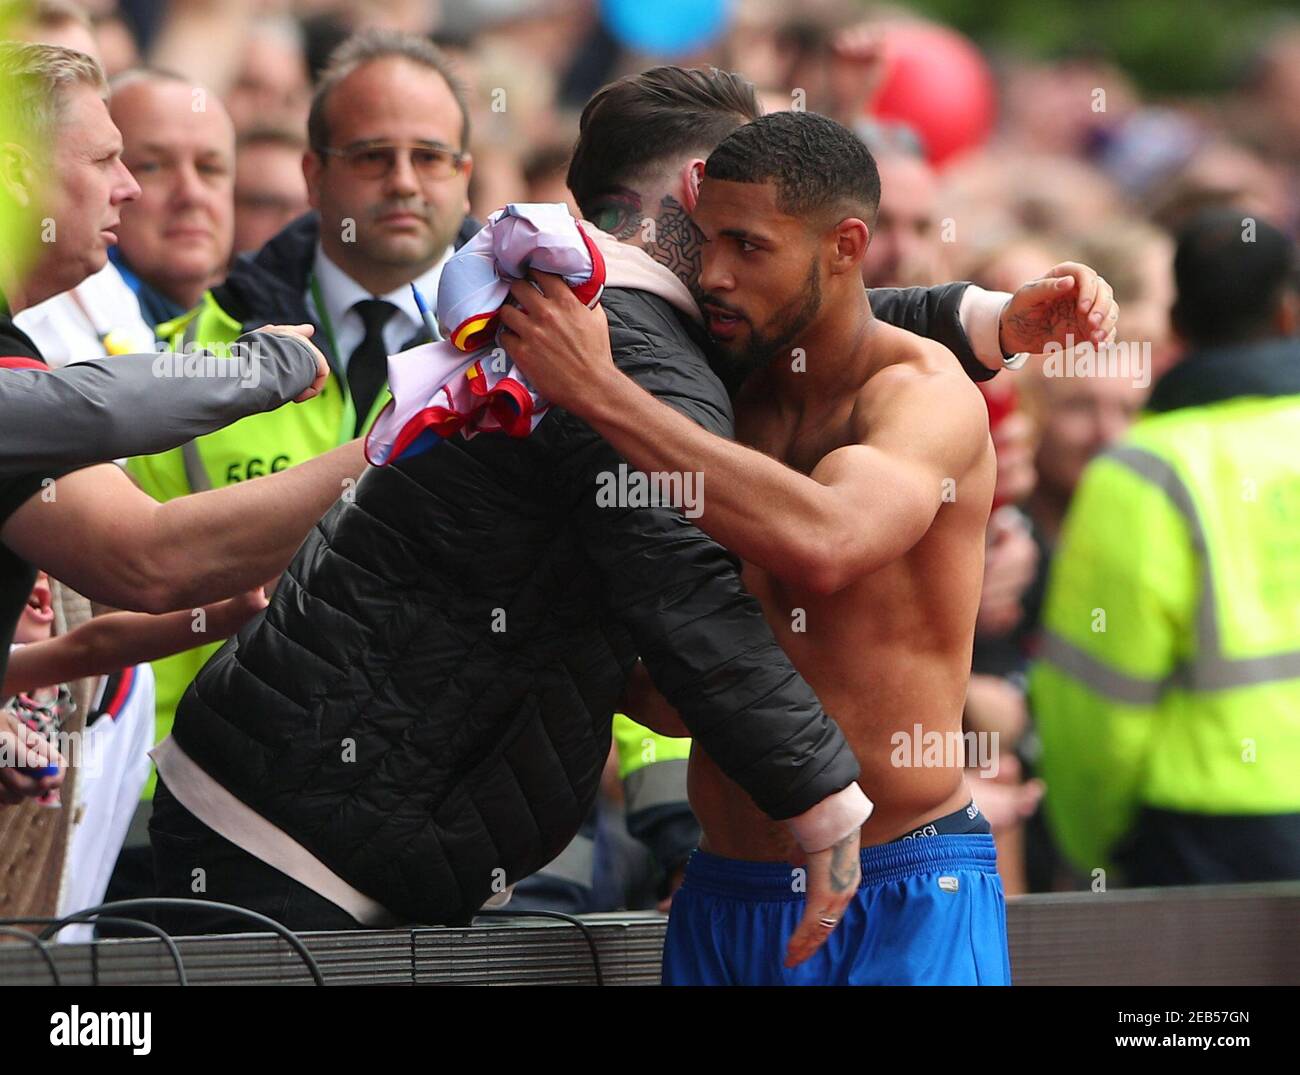 Soccer Football - Premier League - Crystal Palace vs West Bromwich Albion - Selhurst Park, London, Britain - May 13, 2018   Crystal Palace's Ruben Loftus-Cheek with a fan after the match   REUTERS/Hannah McKay    EDITORIAL USE ONLY. No use with unauthorized audio, video, data, fixture lists, club/league logos or 'live' services. Online in-match use limited to 75 images, no video emulation. No use in betting, games or single club/league/player publications.  Please contact your account representative for further details. Stock Photo